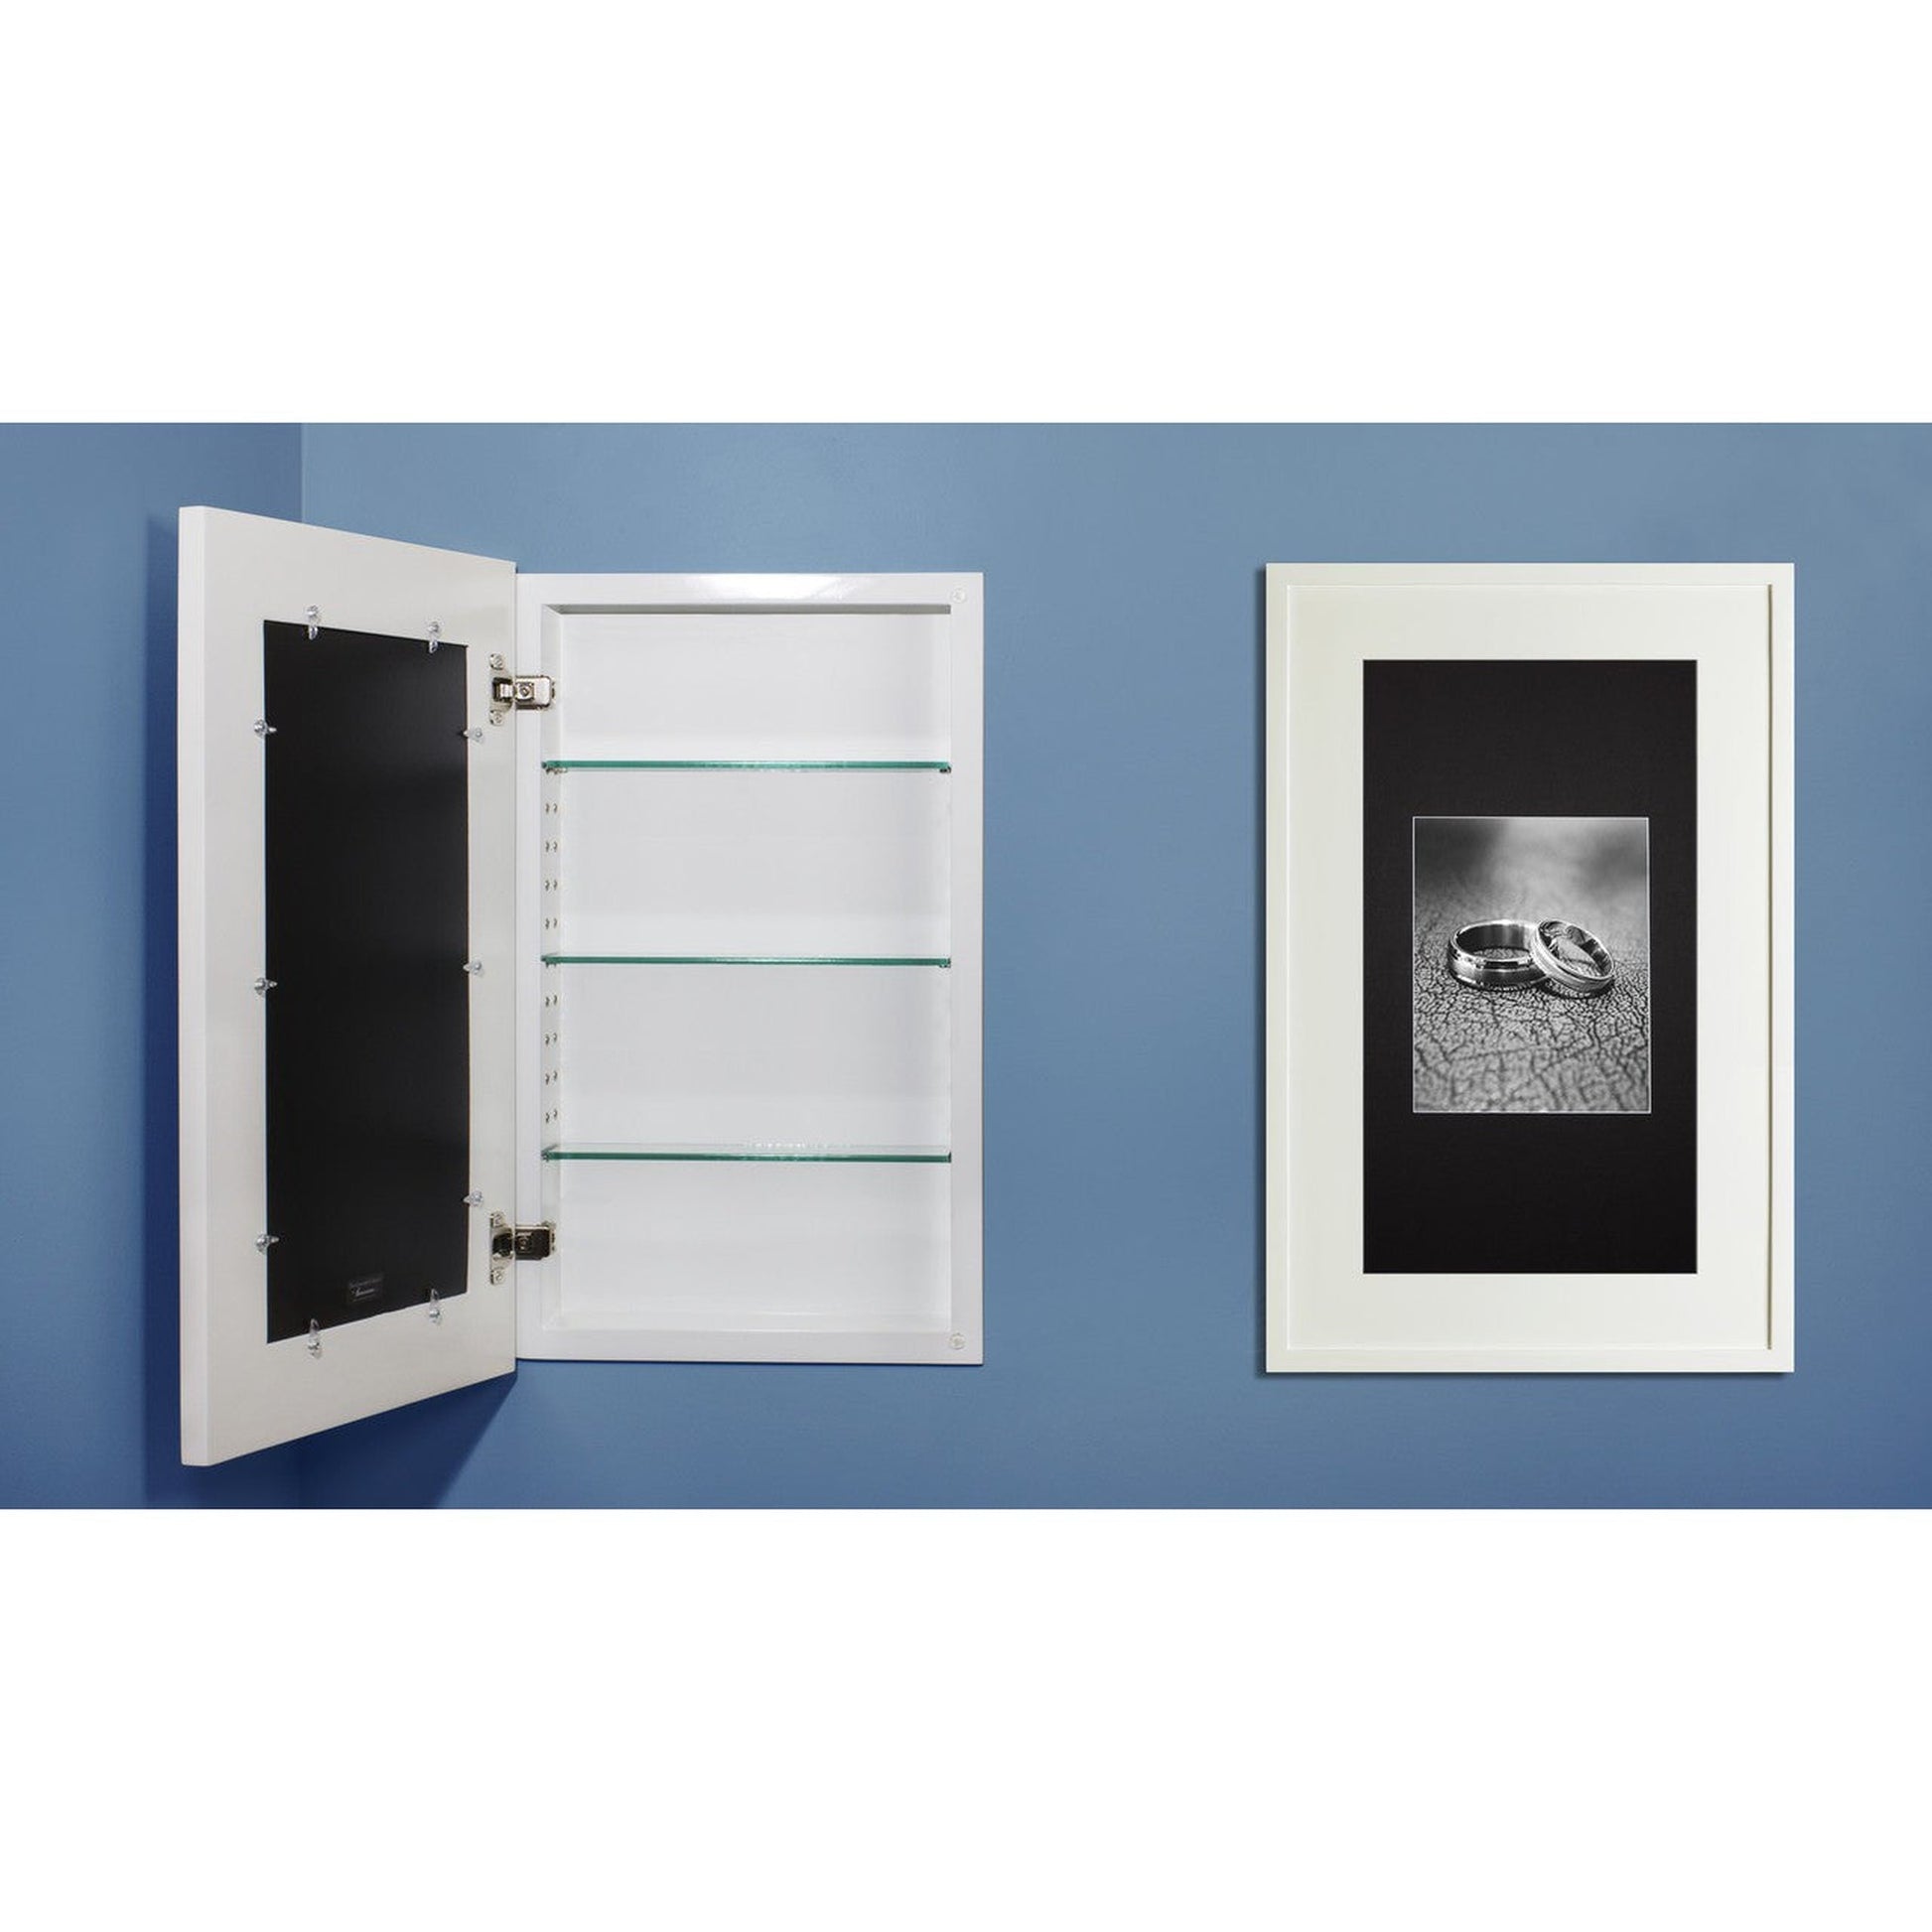 Fox Hollow Furnishings 14" x 24" White Extra Large Contemporary Special 3" Depth White Interior Recessed Picture Frame Medicine Cabinet With Mirror and White Matting